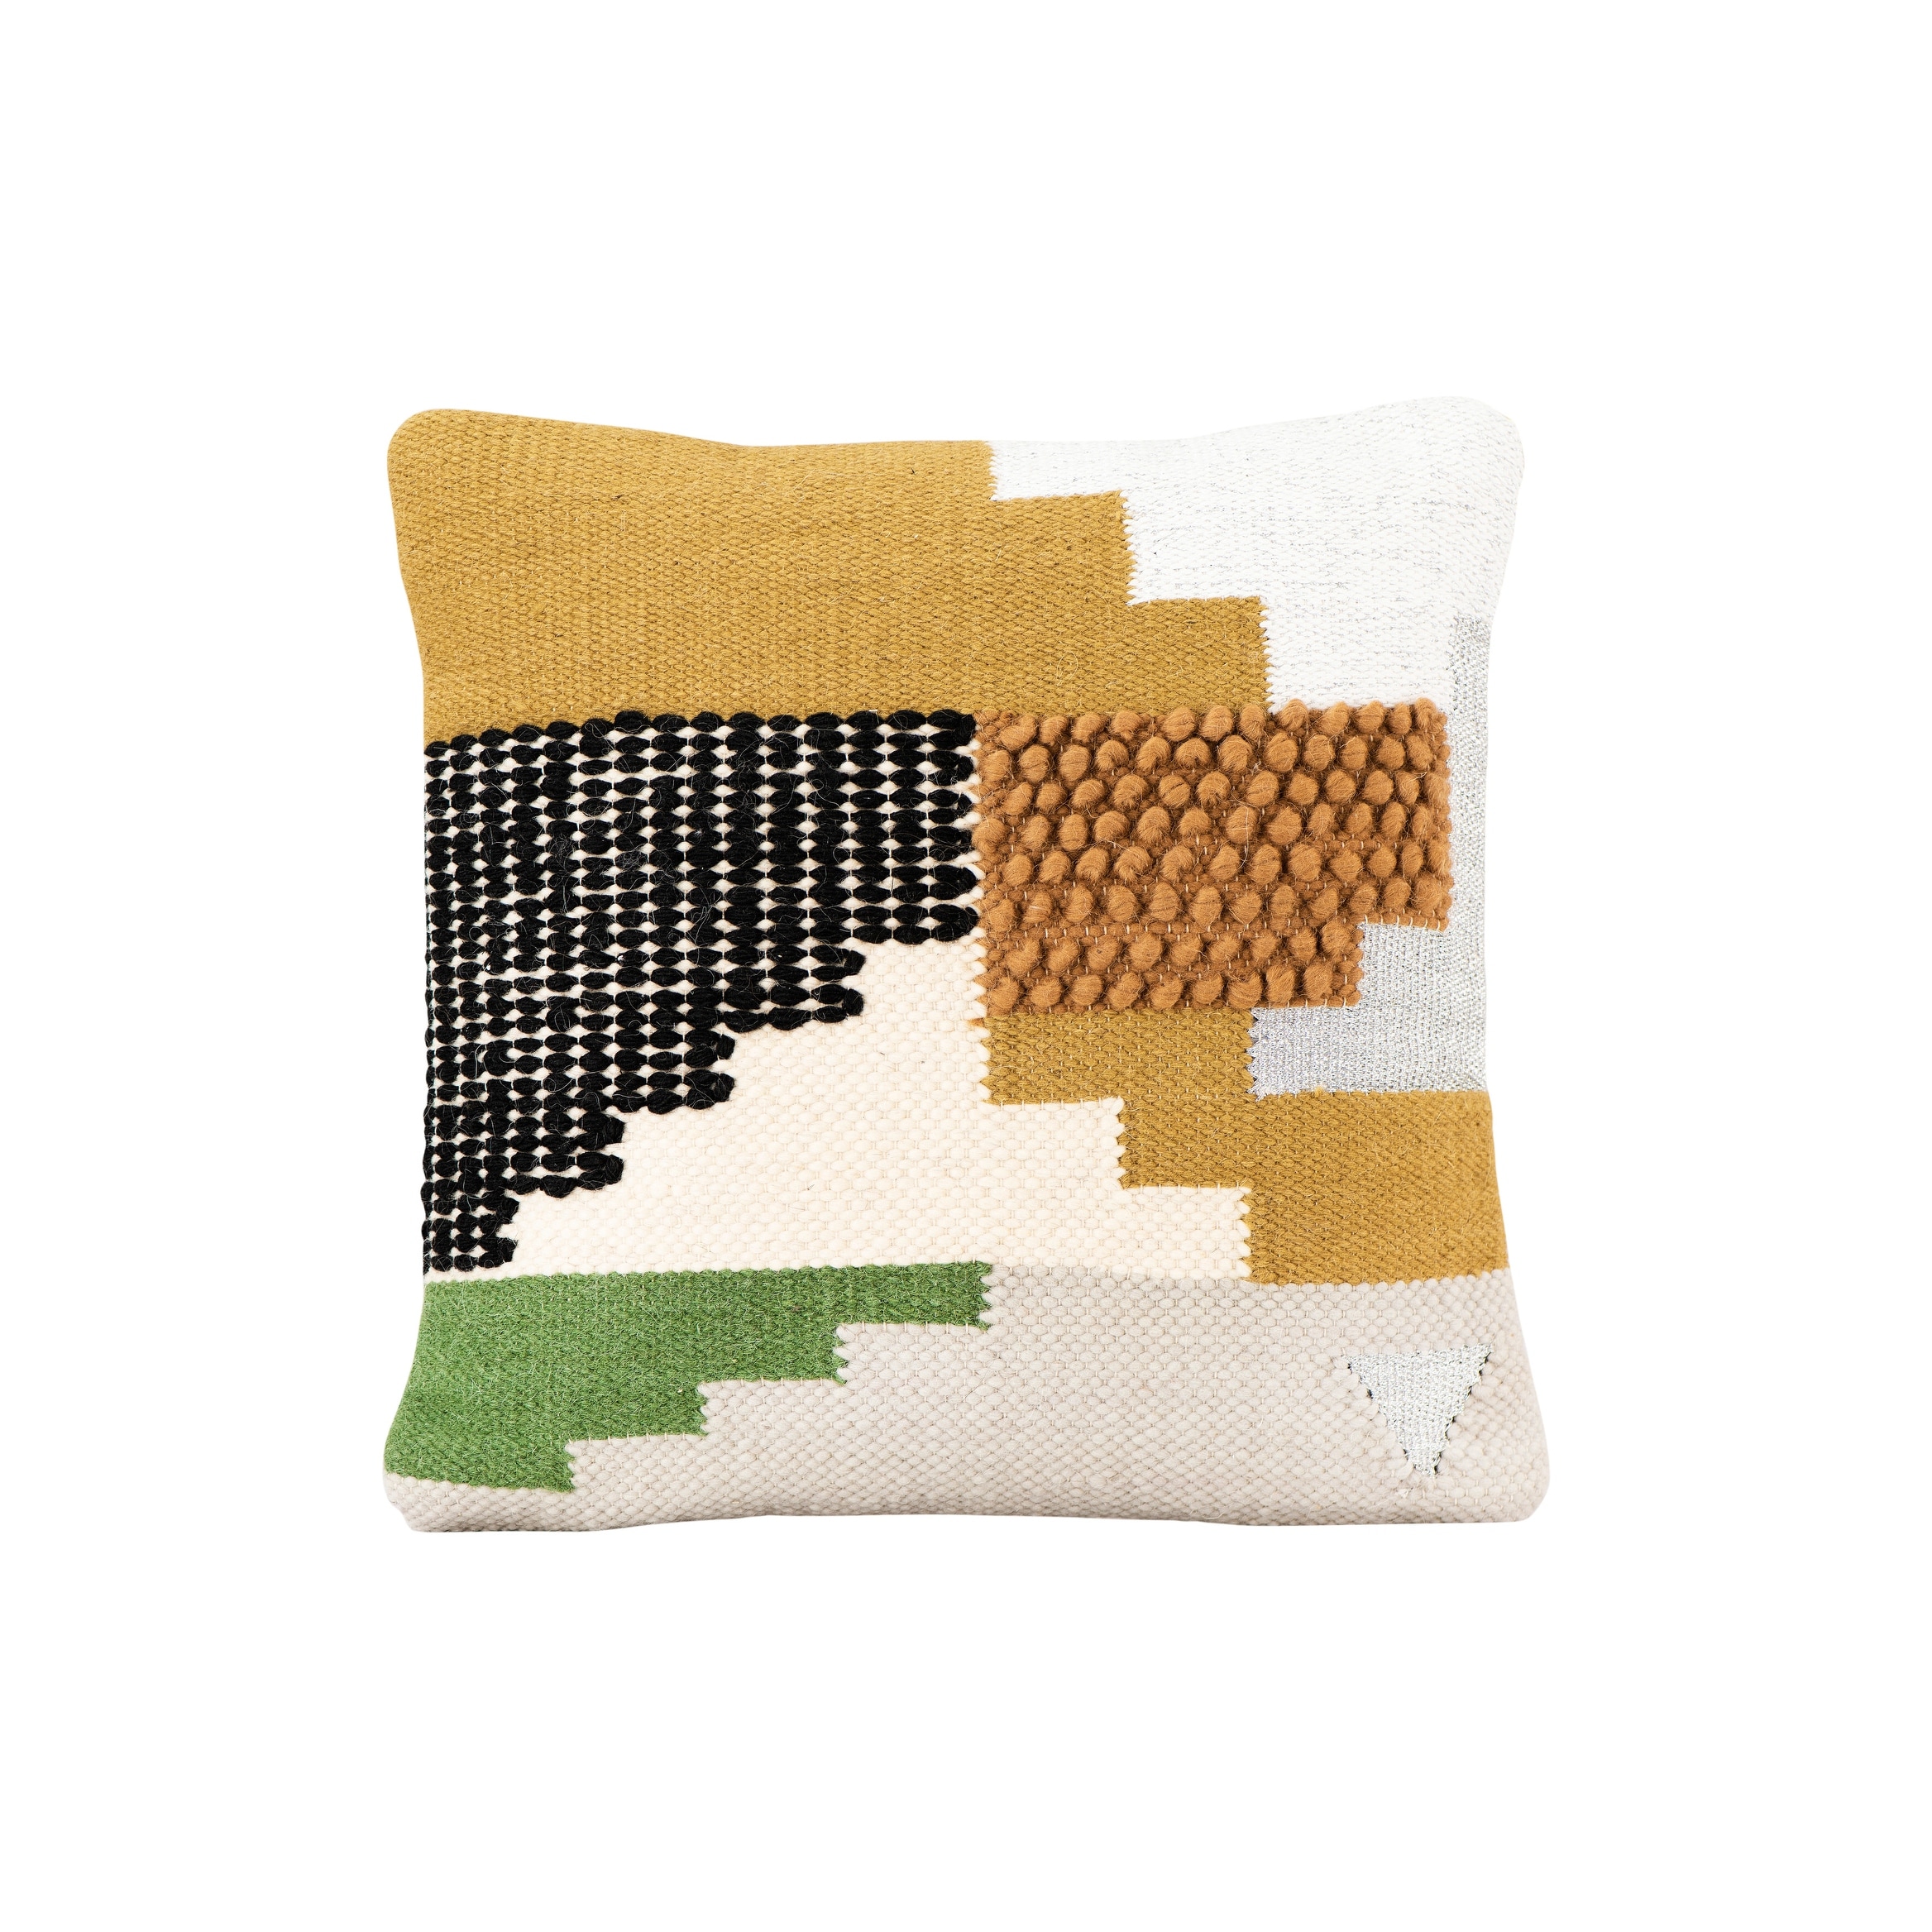 Handwoven White Wool Kilim Pillow with Yellow, Green & Black Accents